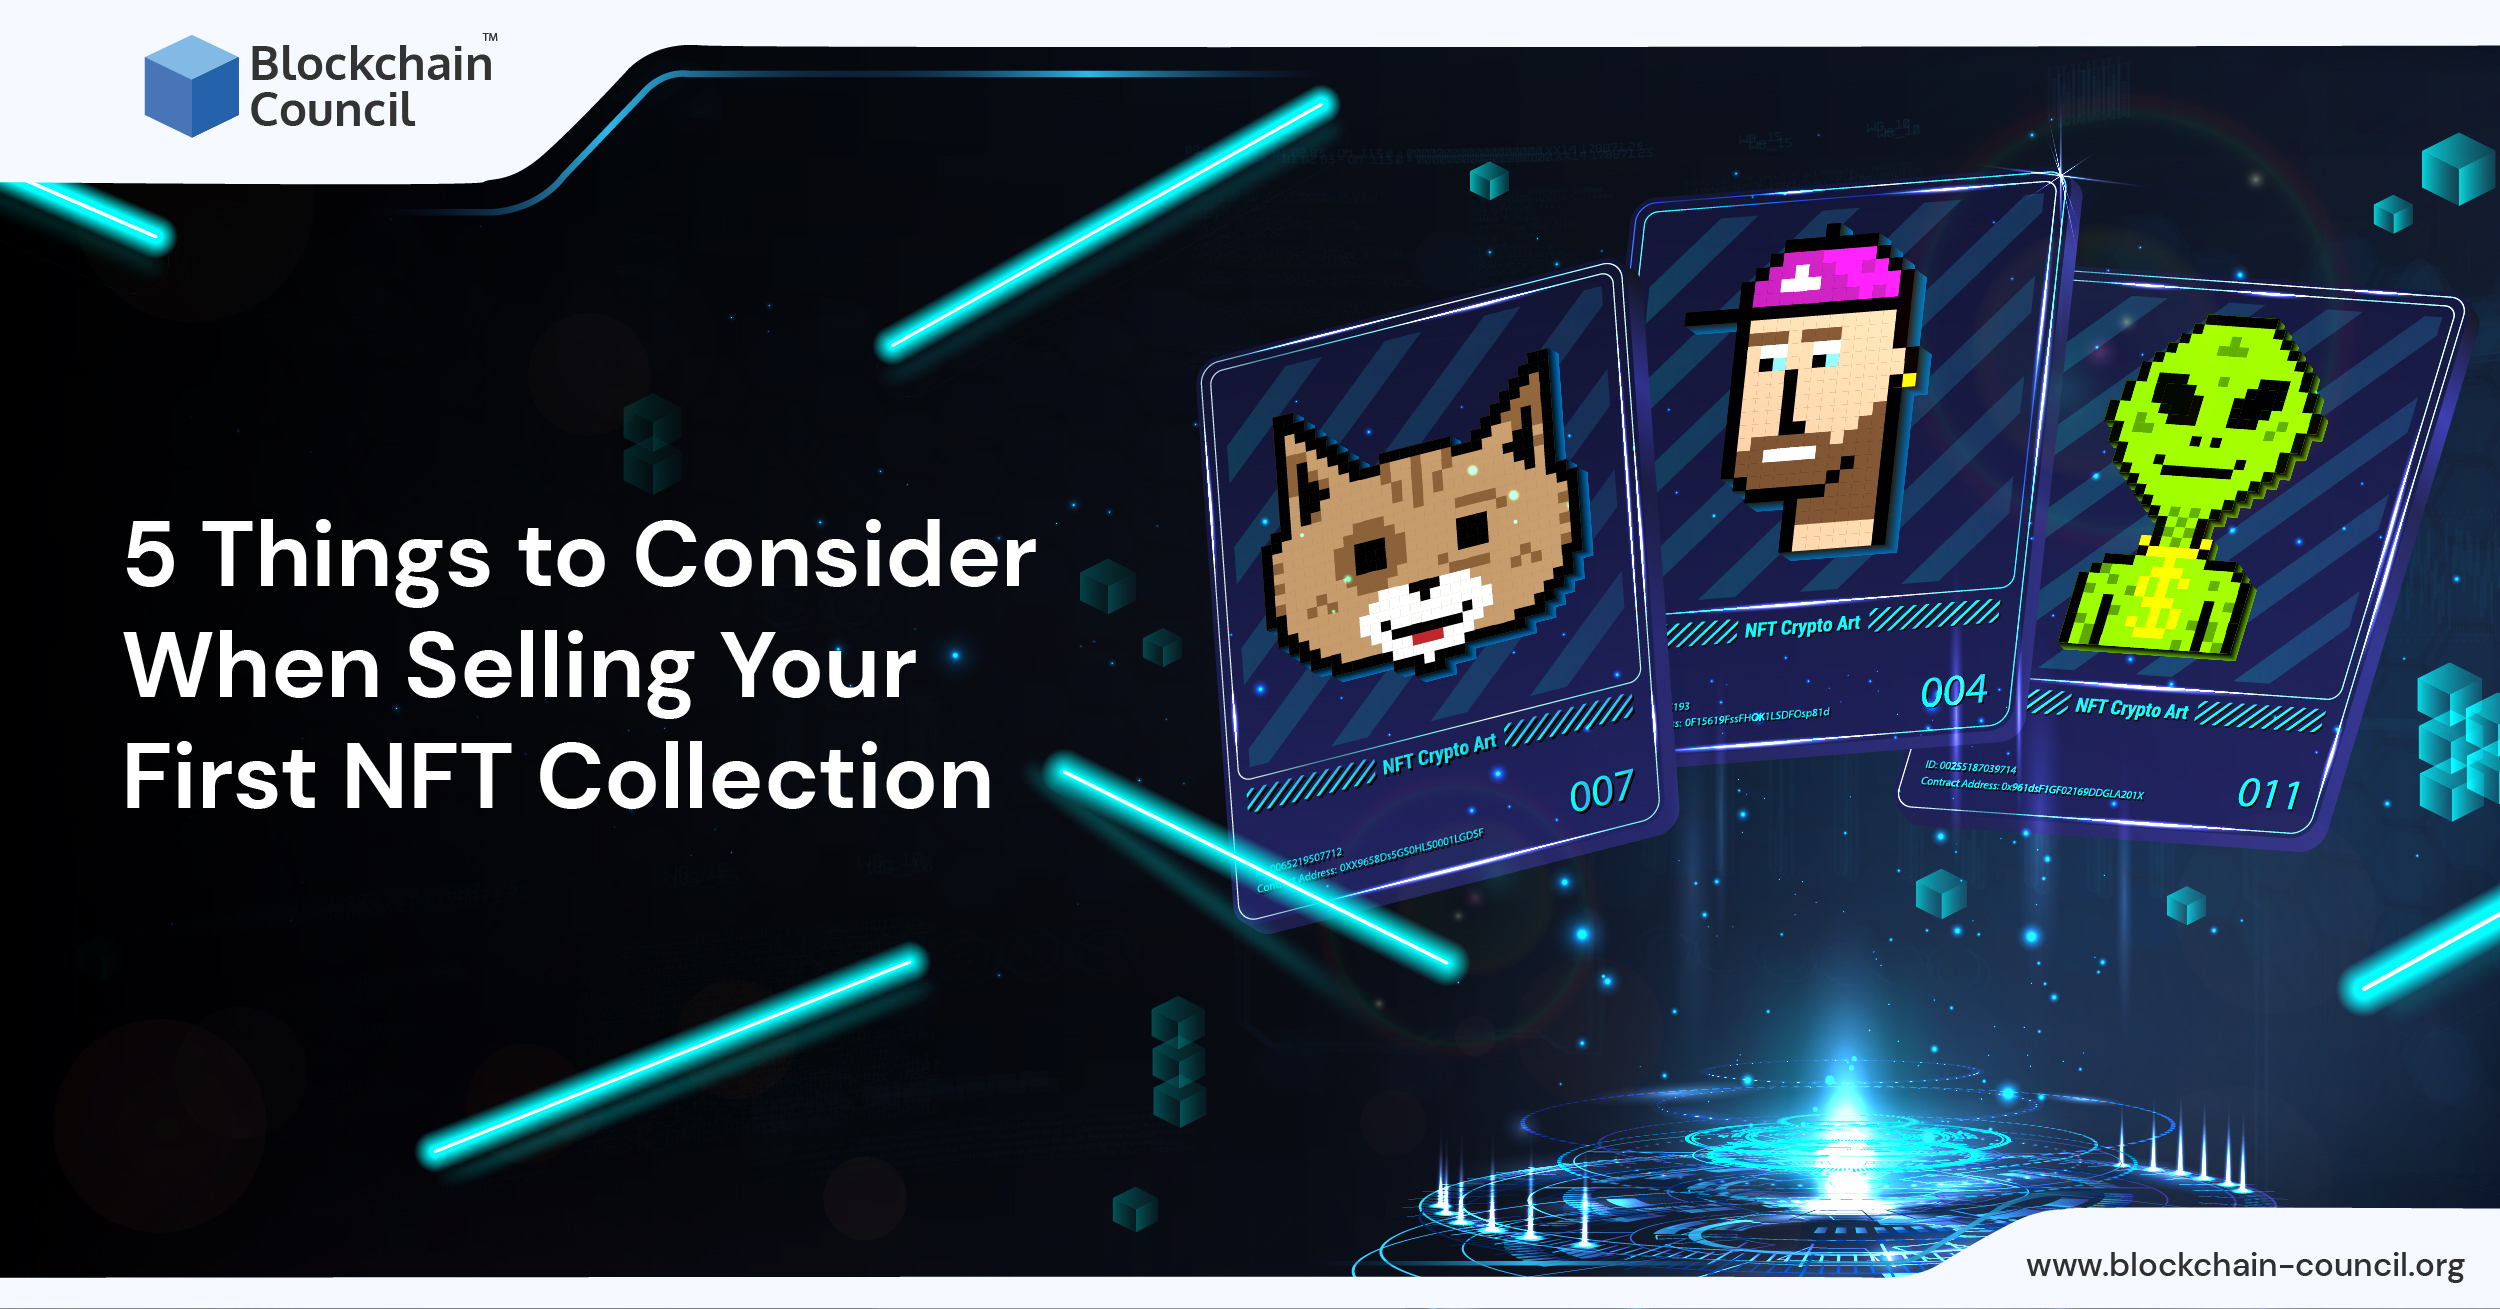 5 Things to Consider When Selling Your First NFT Collection